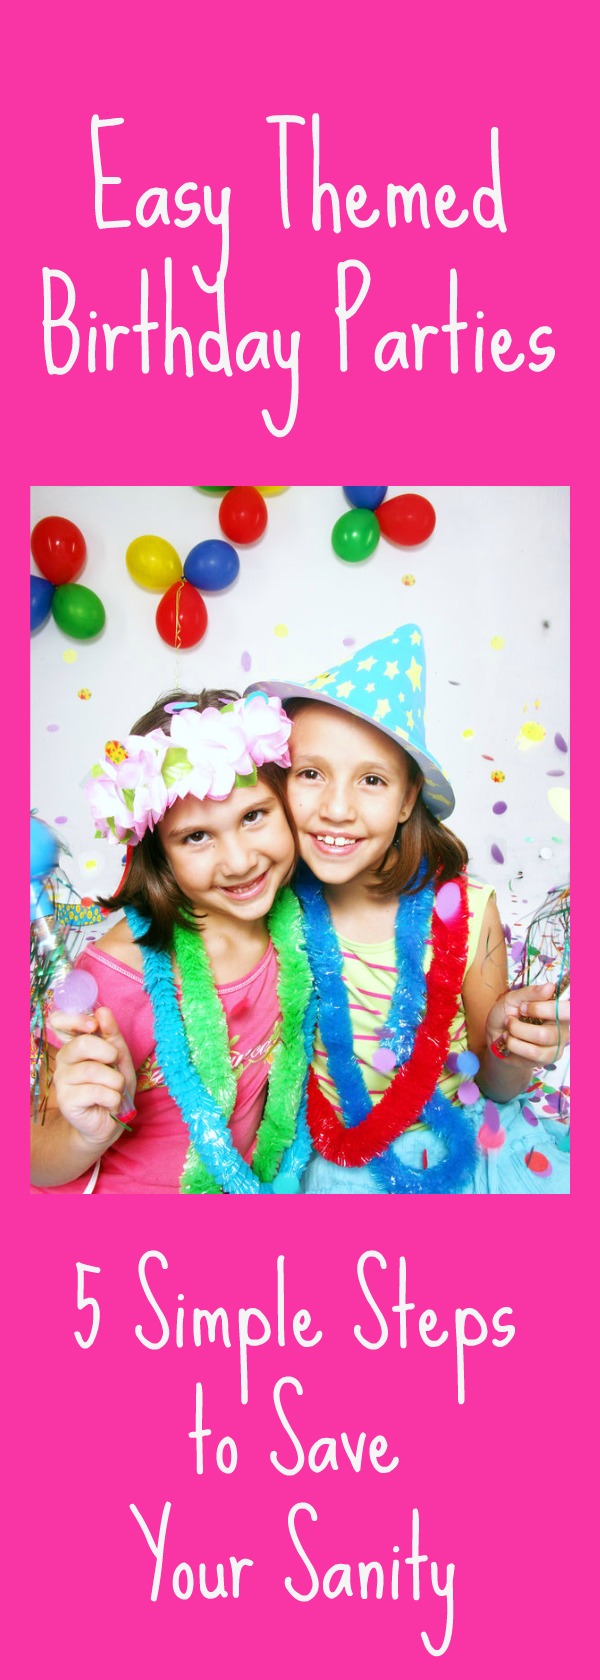 Birthday parties can be stressful and overwhelming, but you want to have an Easy Themed Birthday Party. You can if you follow my 5 Simple Steps to Saving Your Sanity!